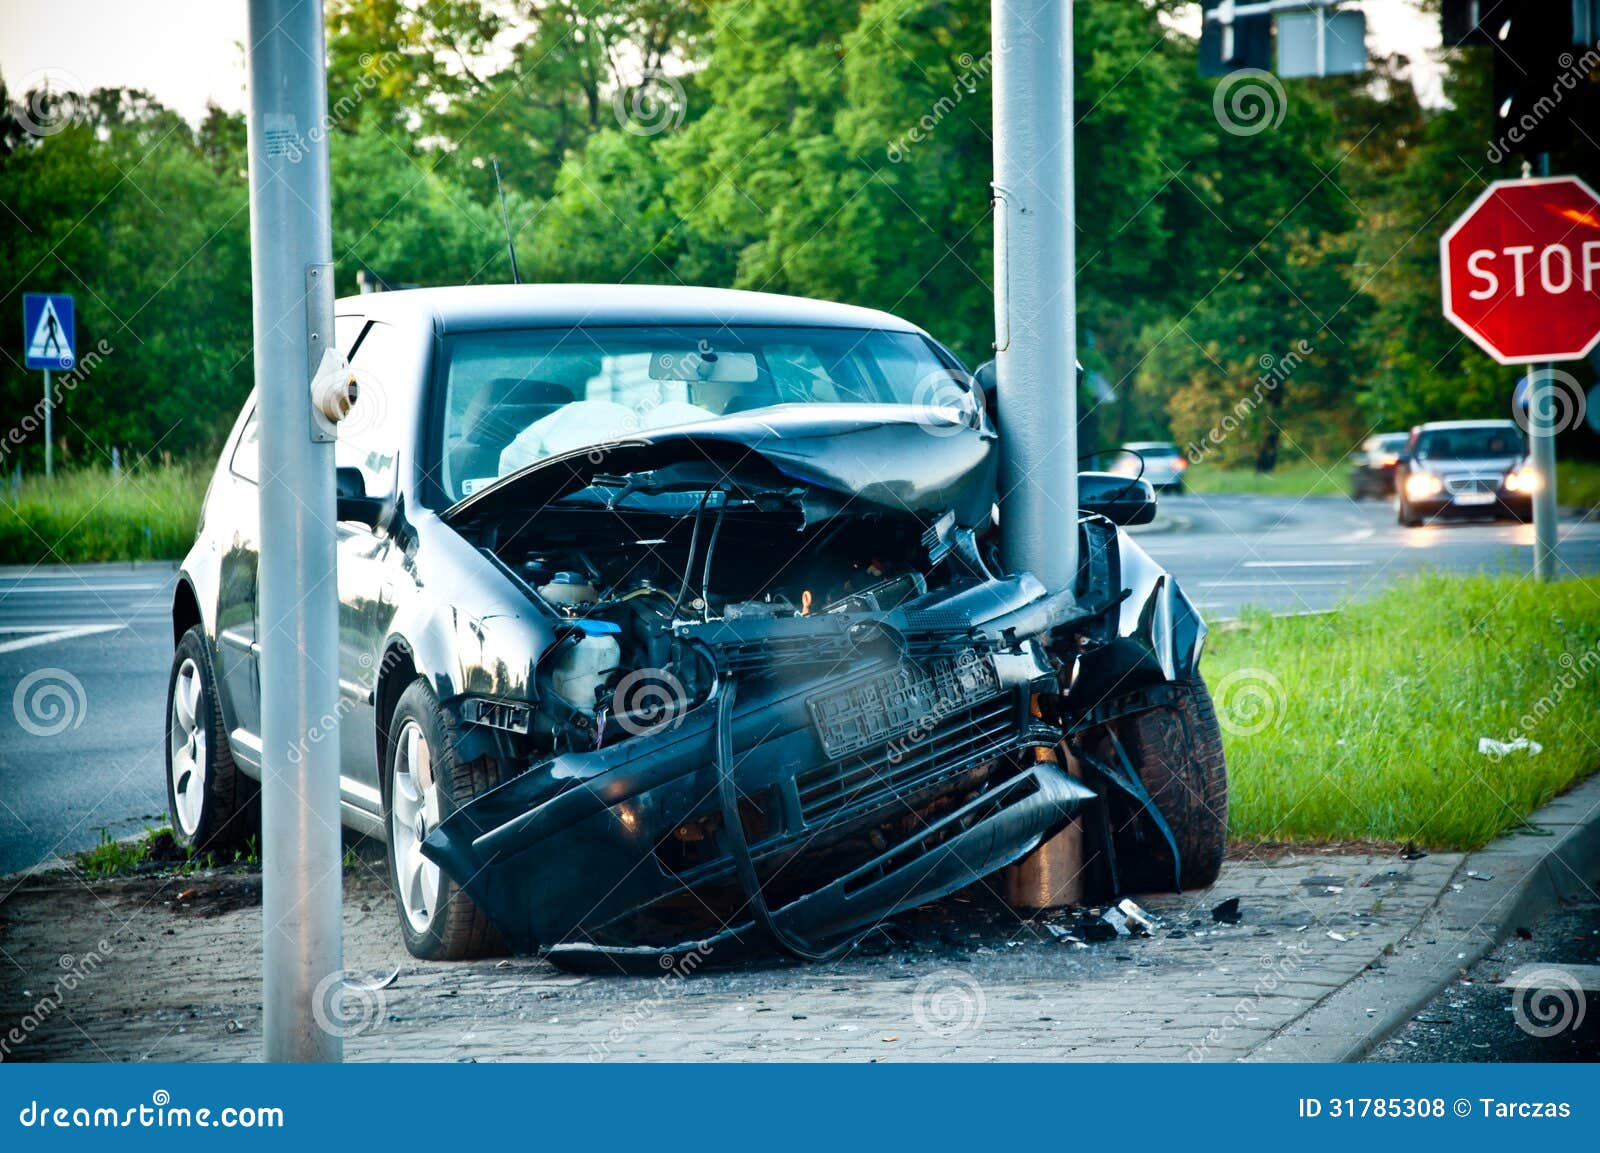 Wrecked Car After Hitting A Lamp Post Royalty Free Stock Photos - Image